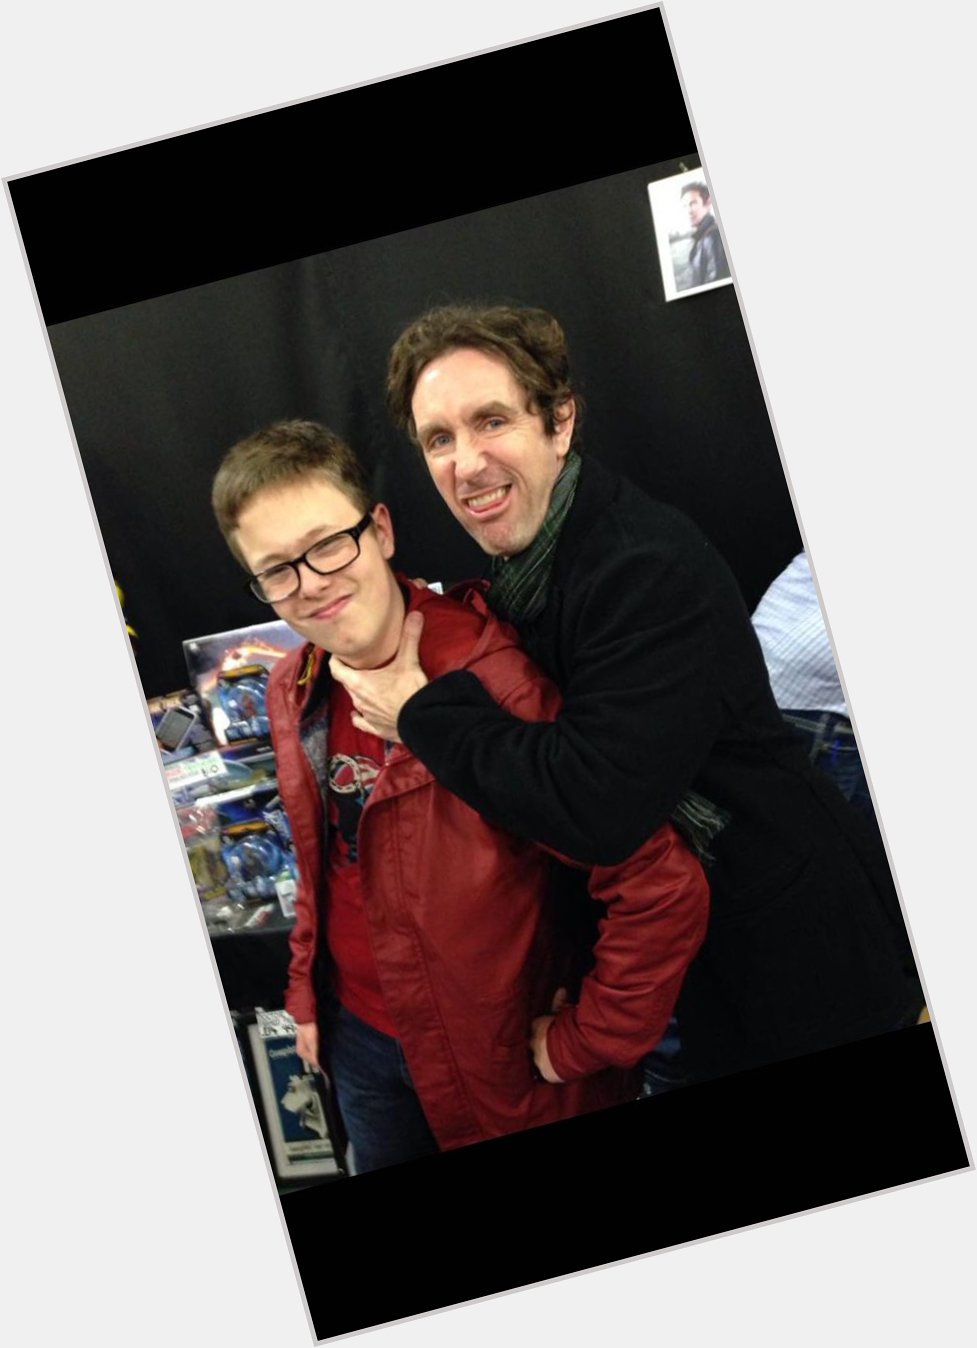 A BIG Happy birthday to my favourite Doctor, Paul McGann. May you have continual access to your fountain of youth  